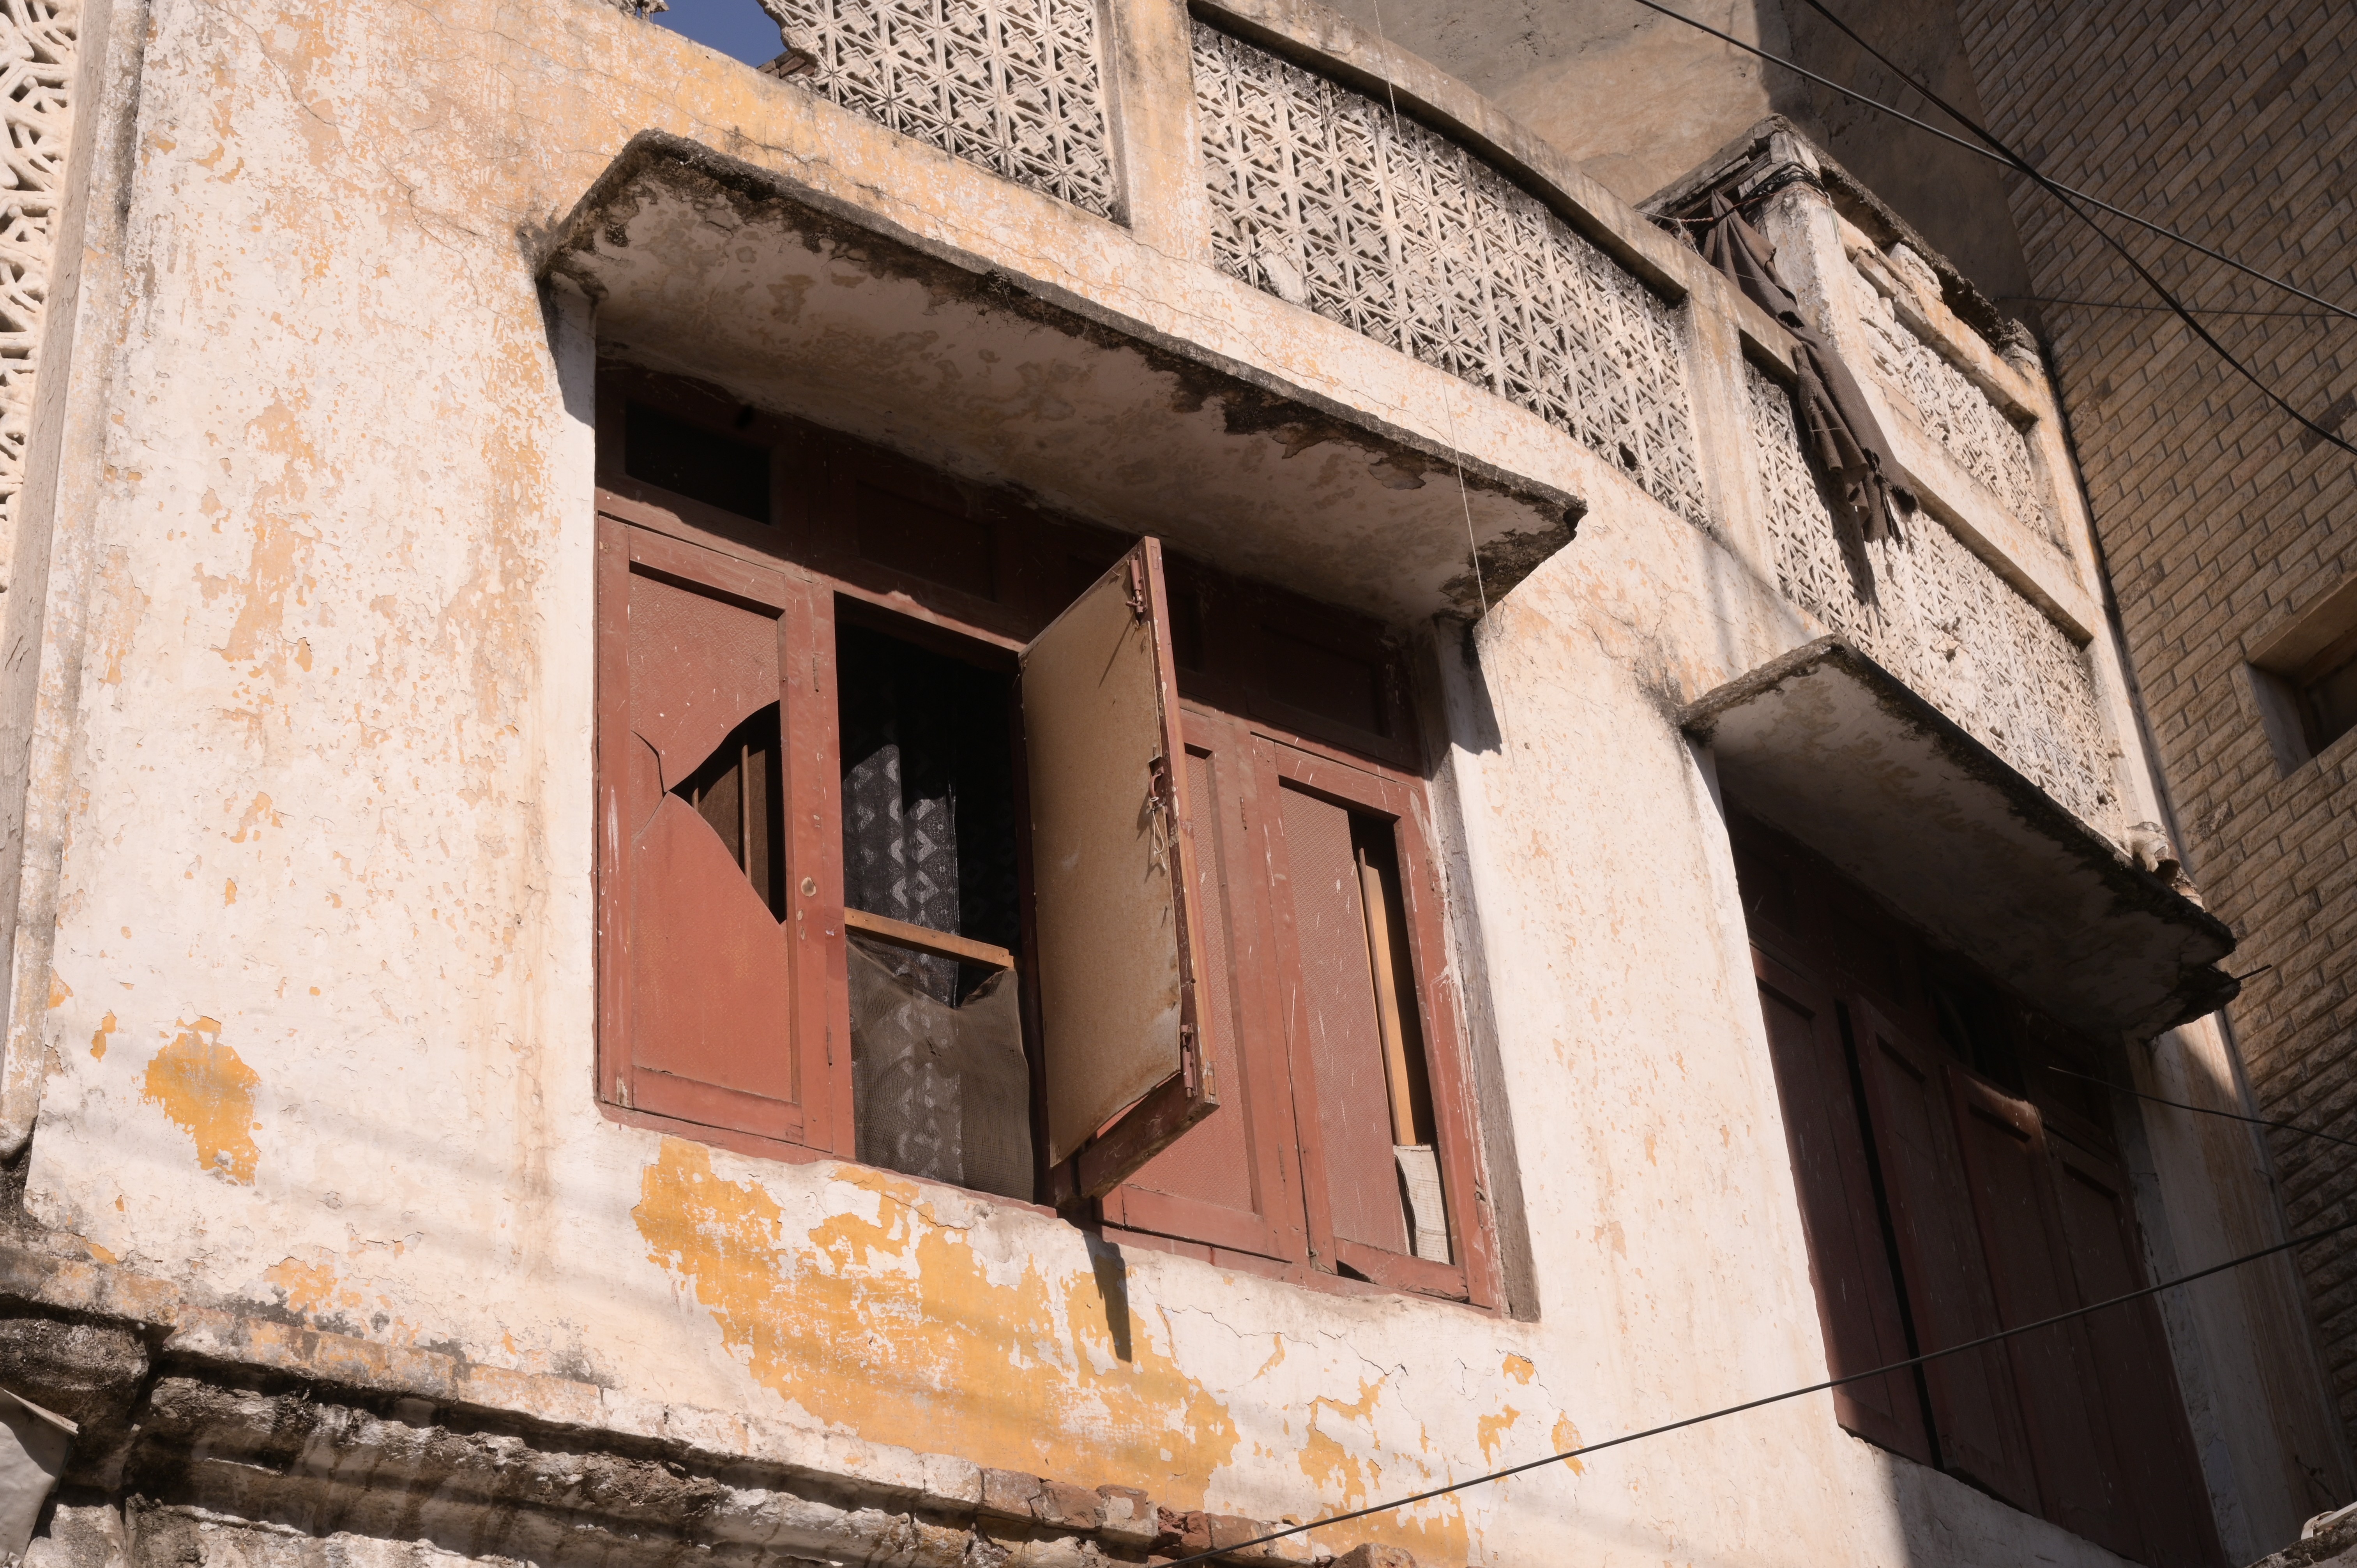 A broken wooden window showing the architectural heritage of Rawalpindi